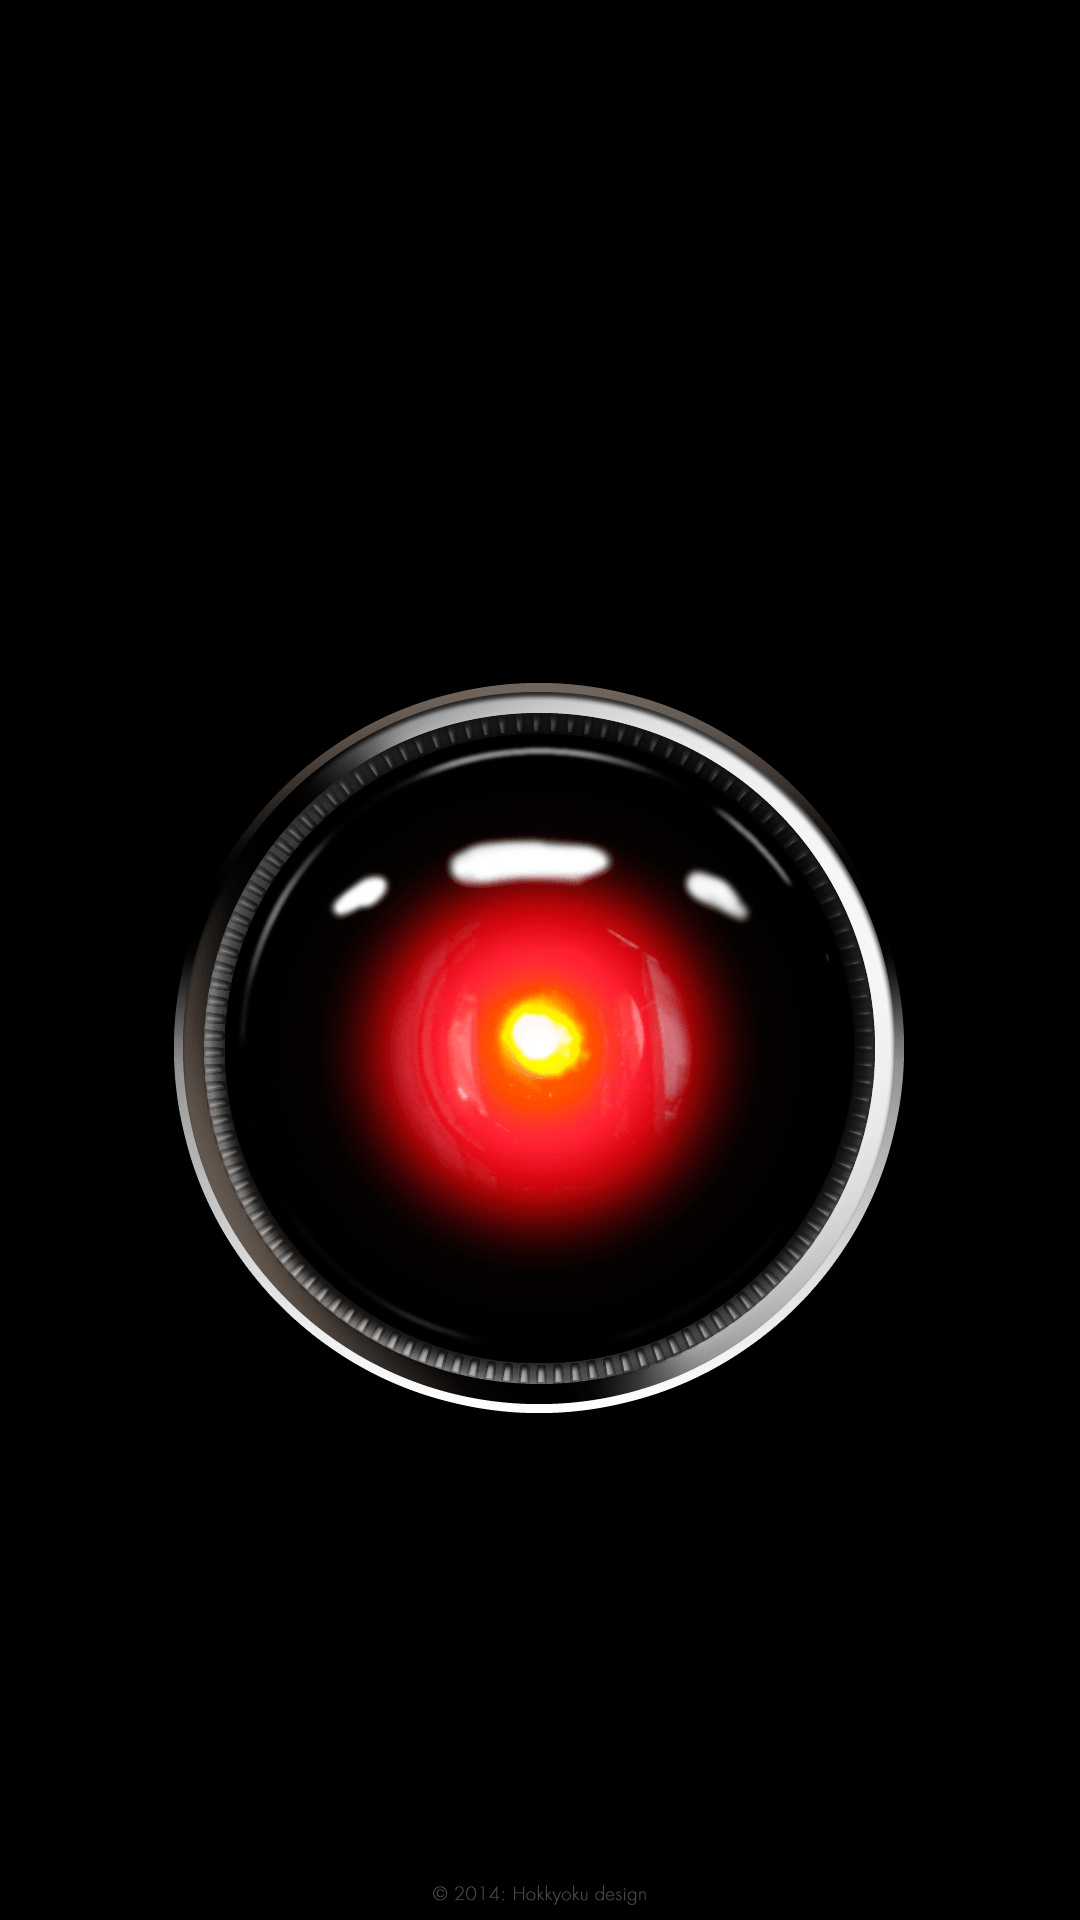 HAL 9000, 2001 Space Odyssey, Artificial intelligence, Cinematic icon, Space exploration, 1080x1920 Full HD Phone